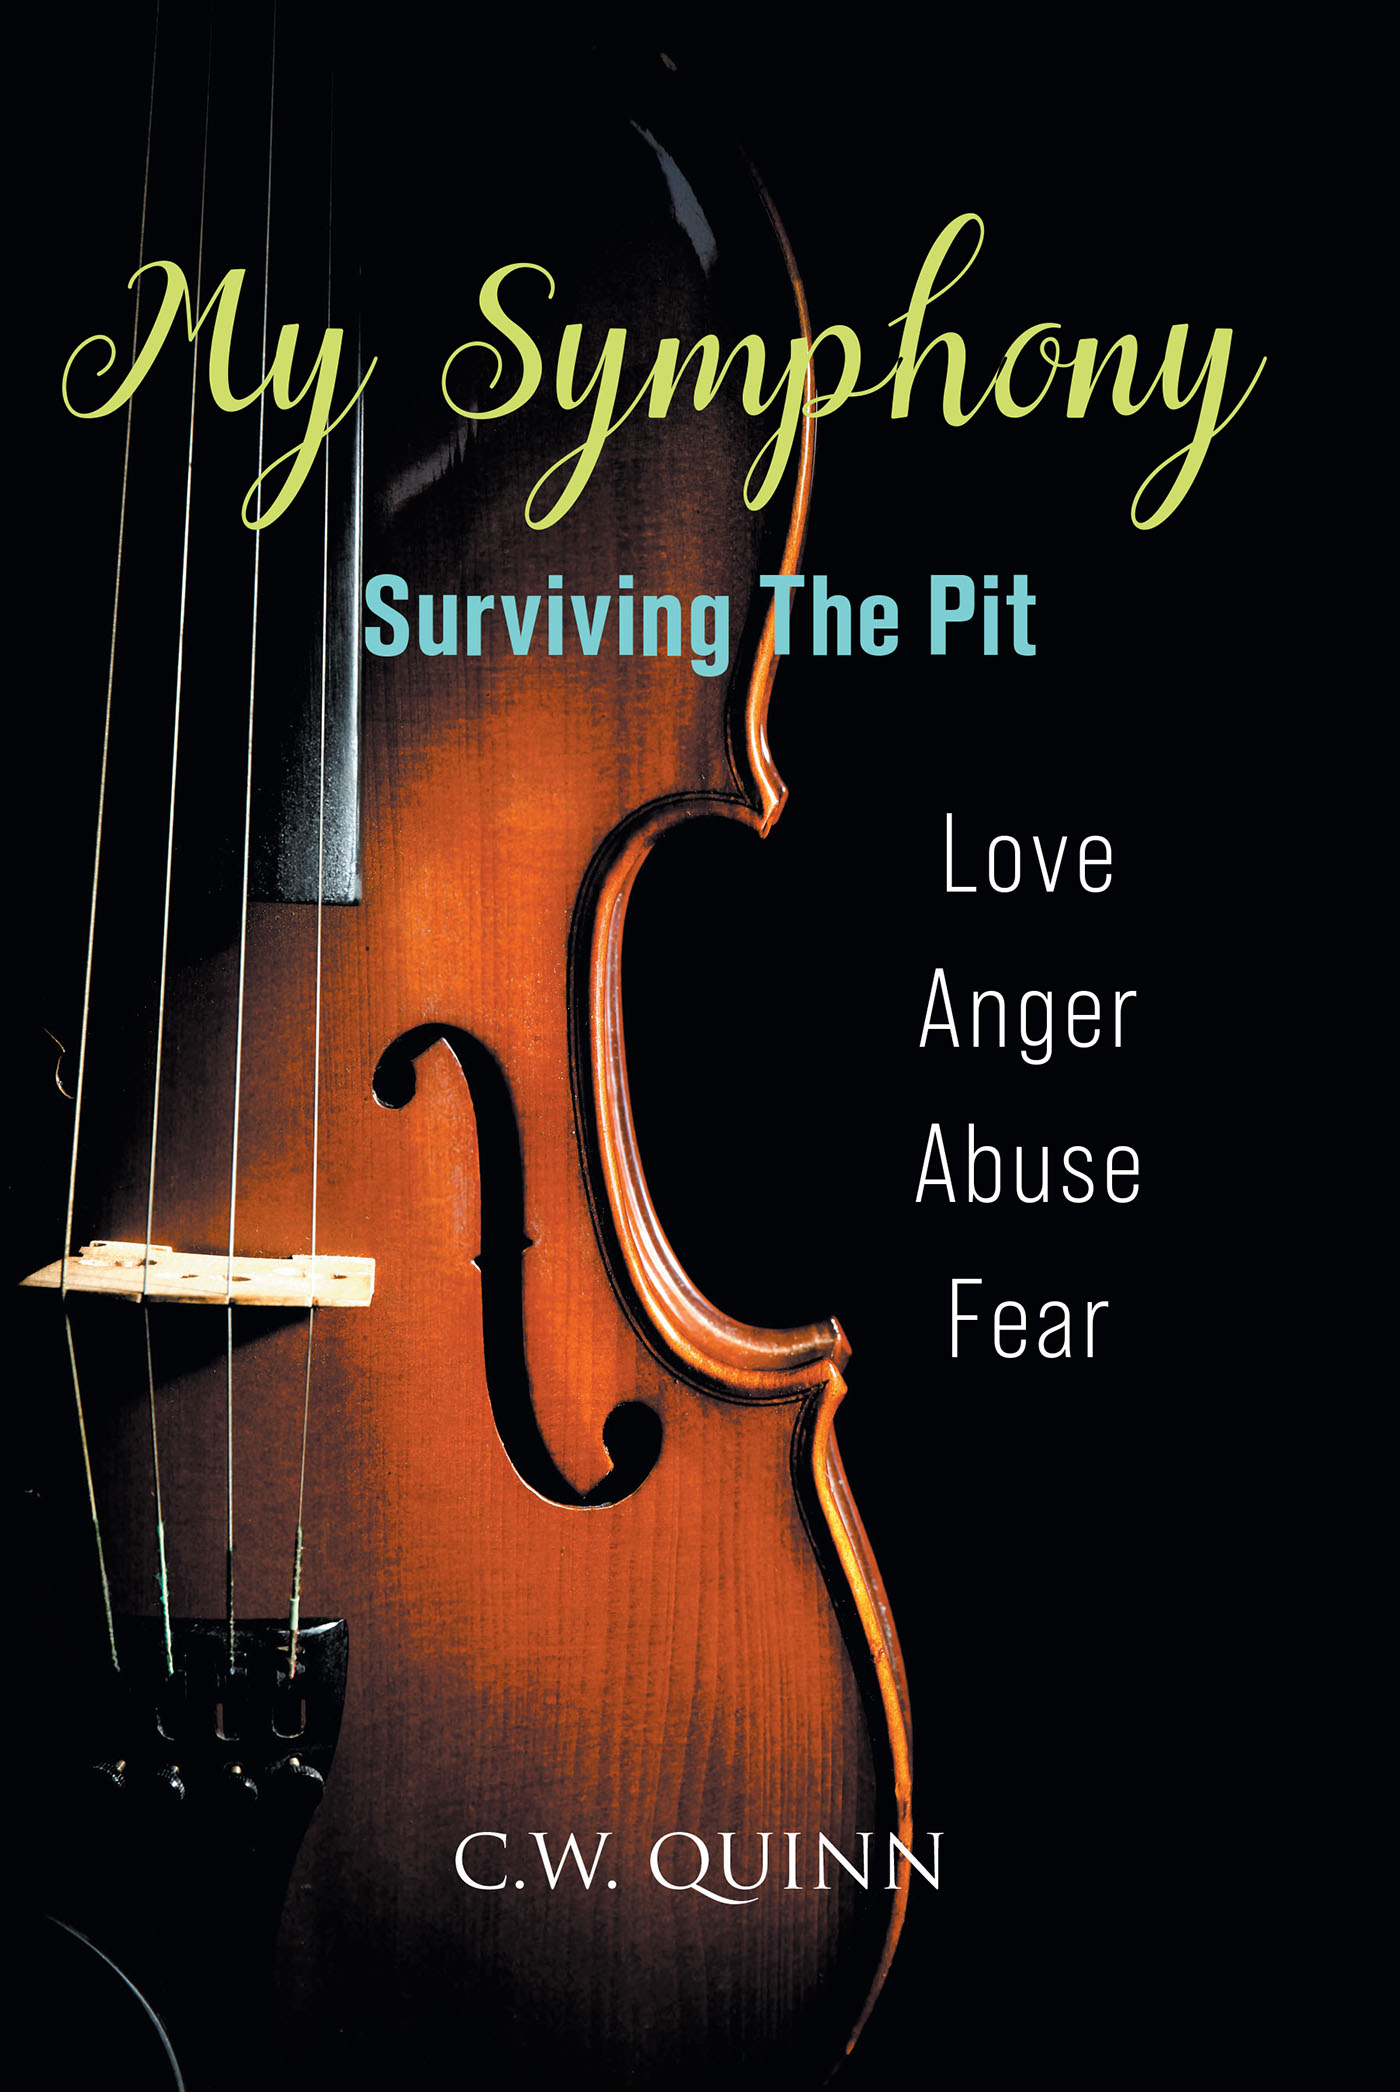 C.W. Quinn’s Newly Released “My Symphony: Surviving the Pit” is an Engaging Fiction That Finds a Young Woman on a Path of Self-Discovery and Healing